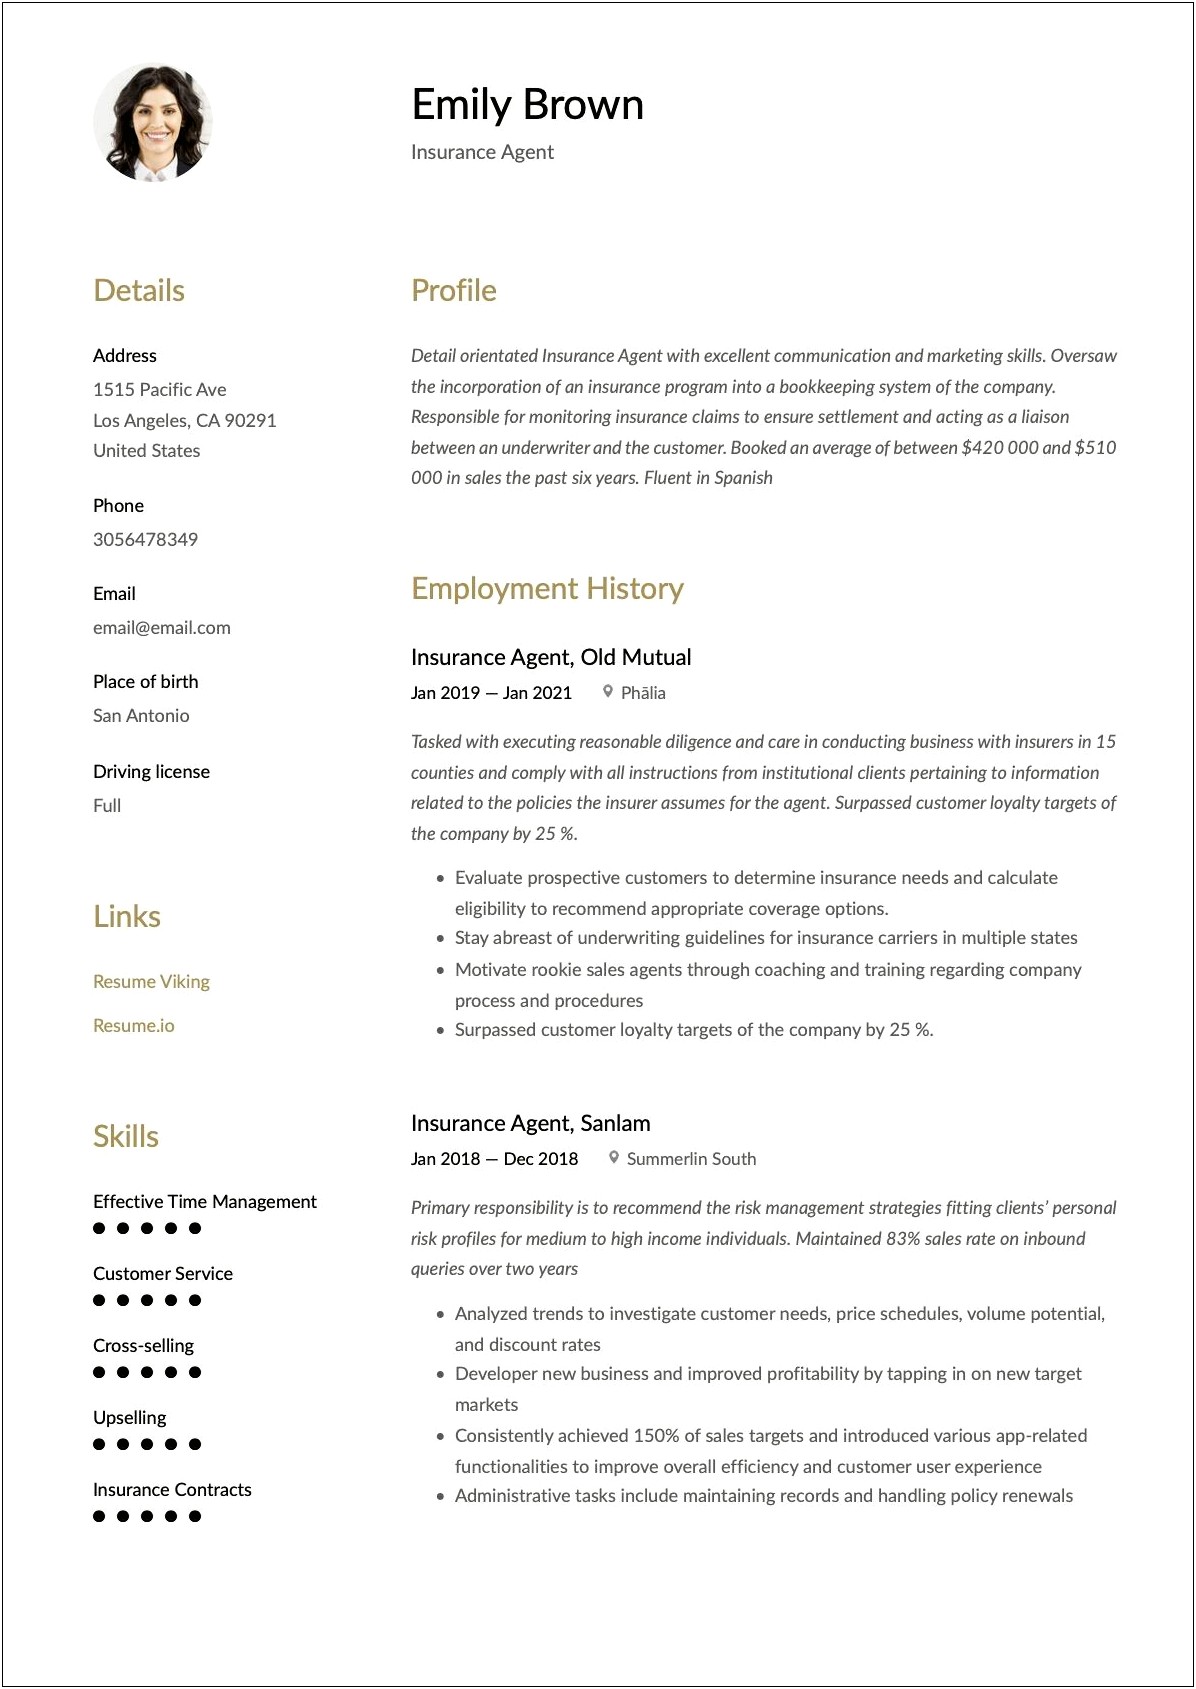 Sample Resume For Property And Casualty Insurance Agent